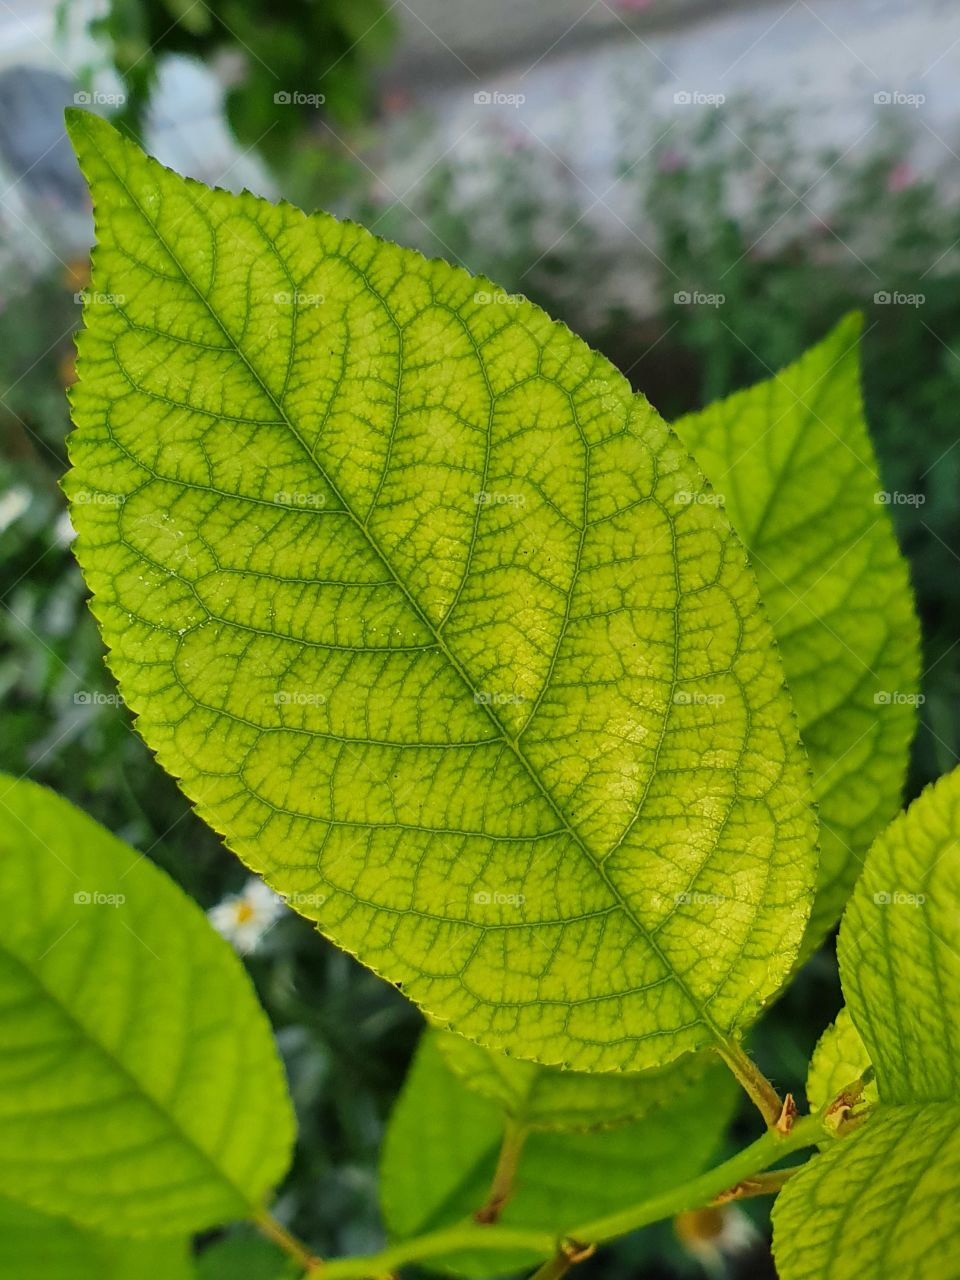 green leaf with interesting veins